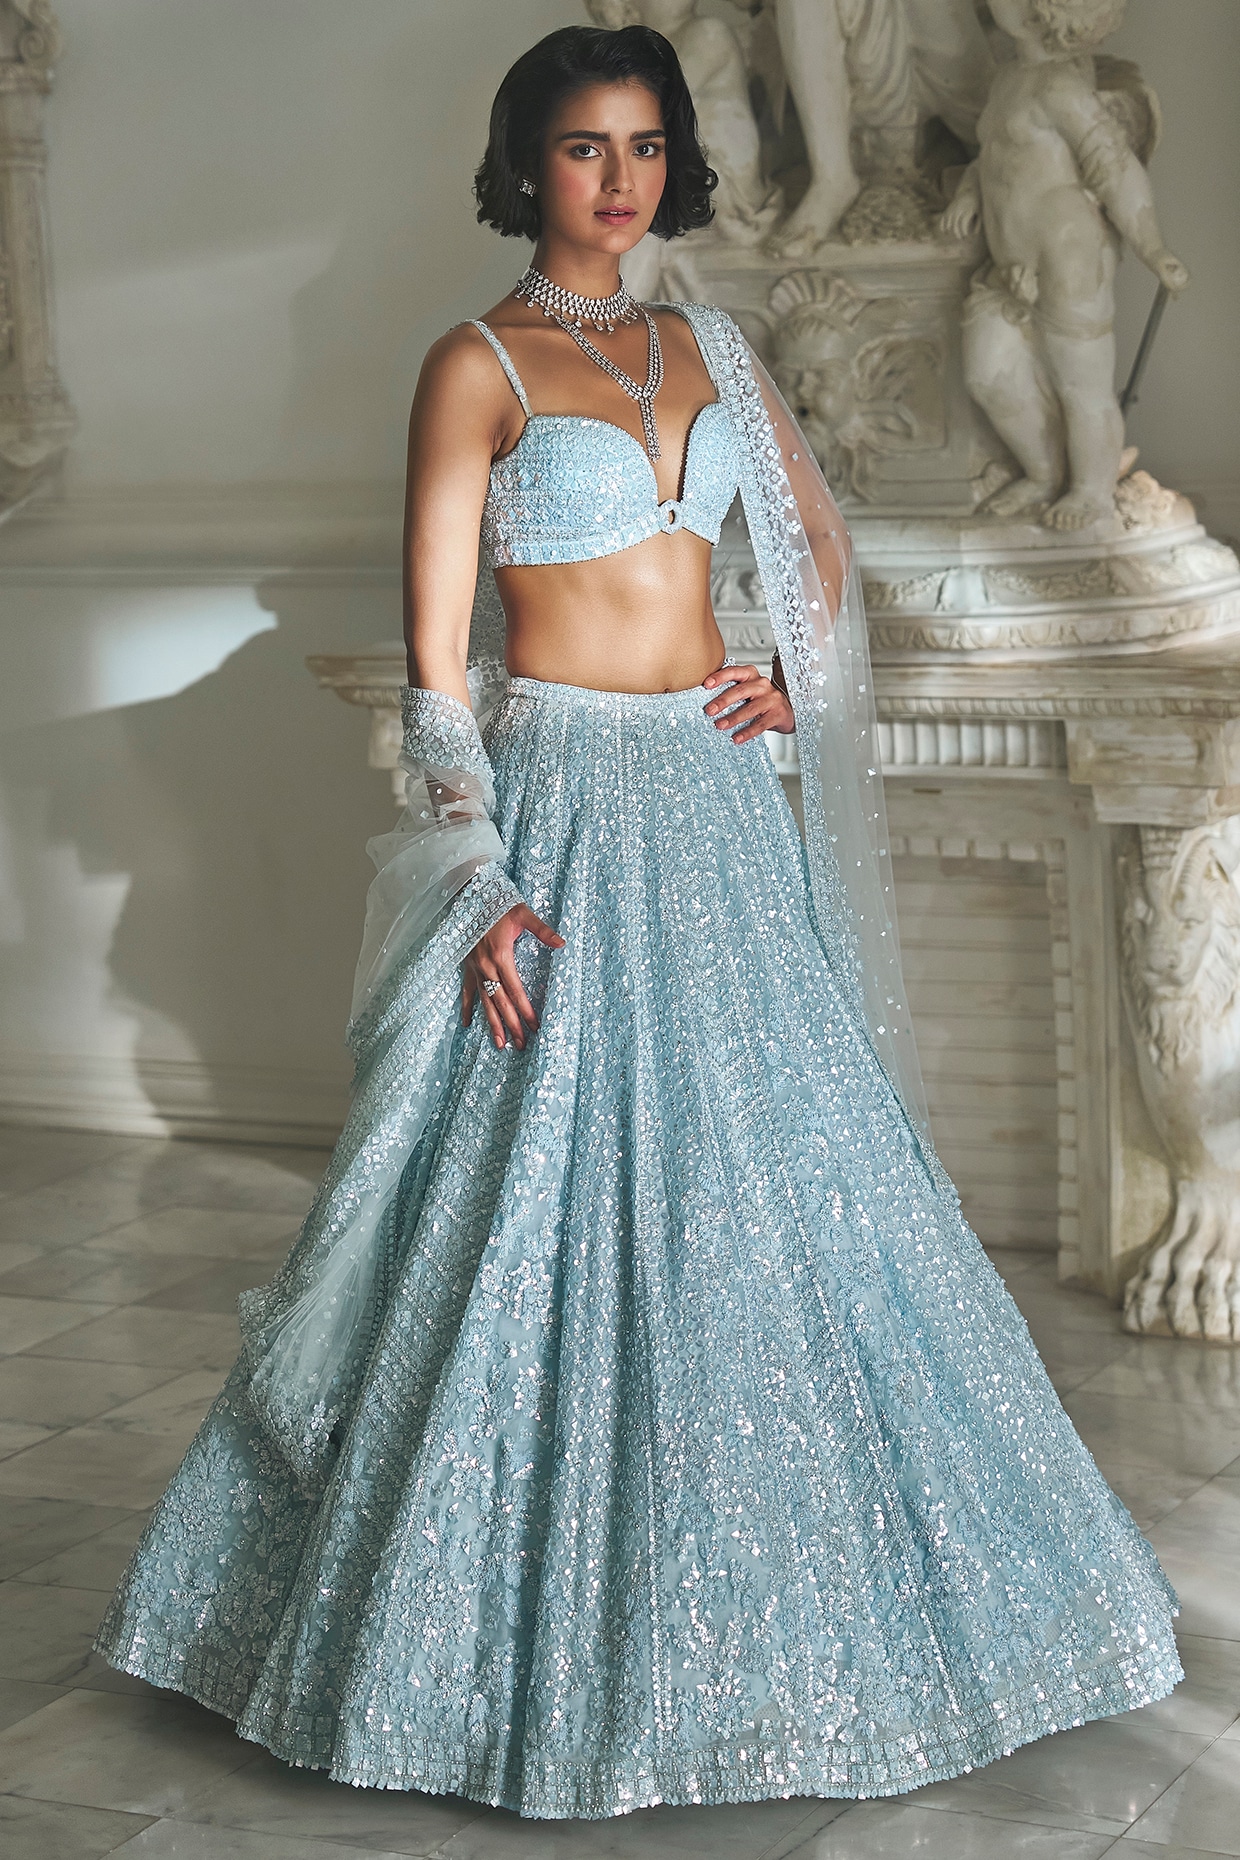 Icy Blue Lengha - 2023 Latest NEW designs